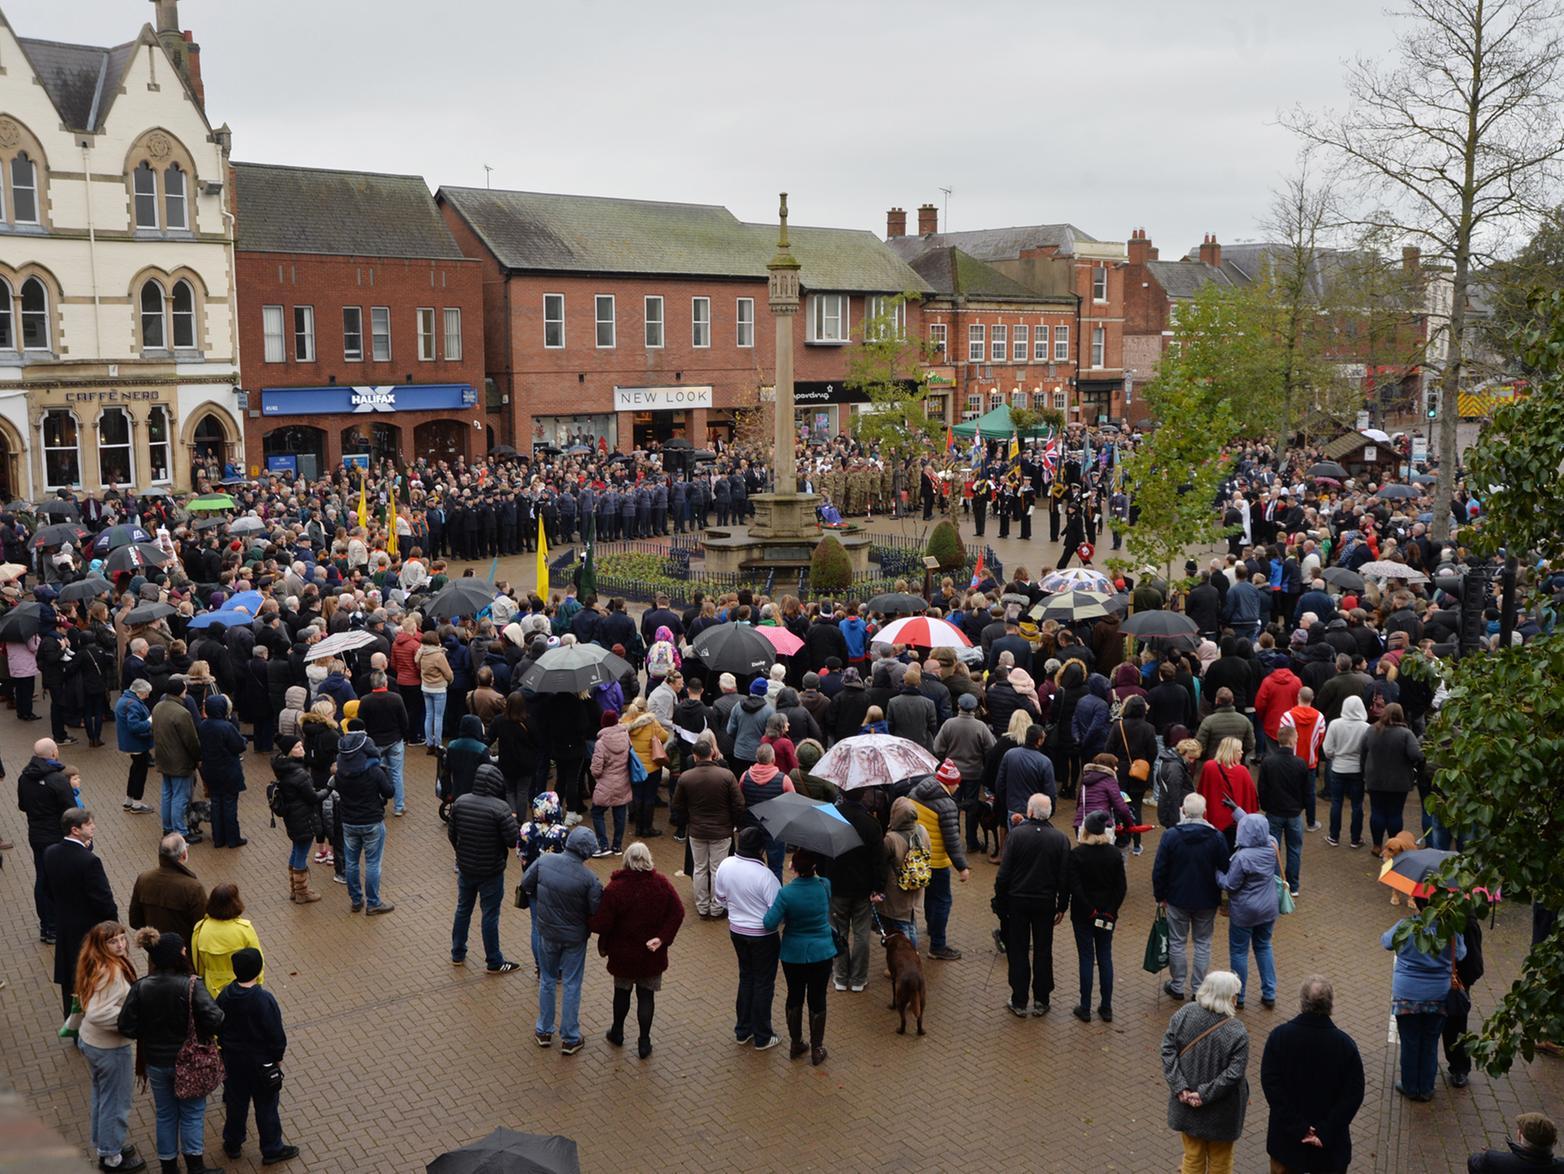 Crowds gather to watch the remembrance wreath laying on the Square in November.